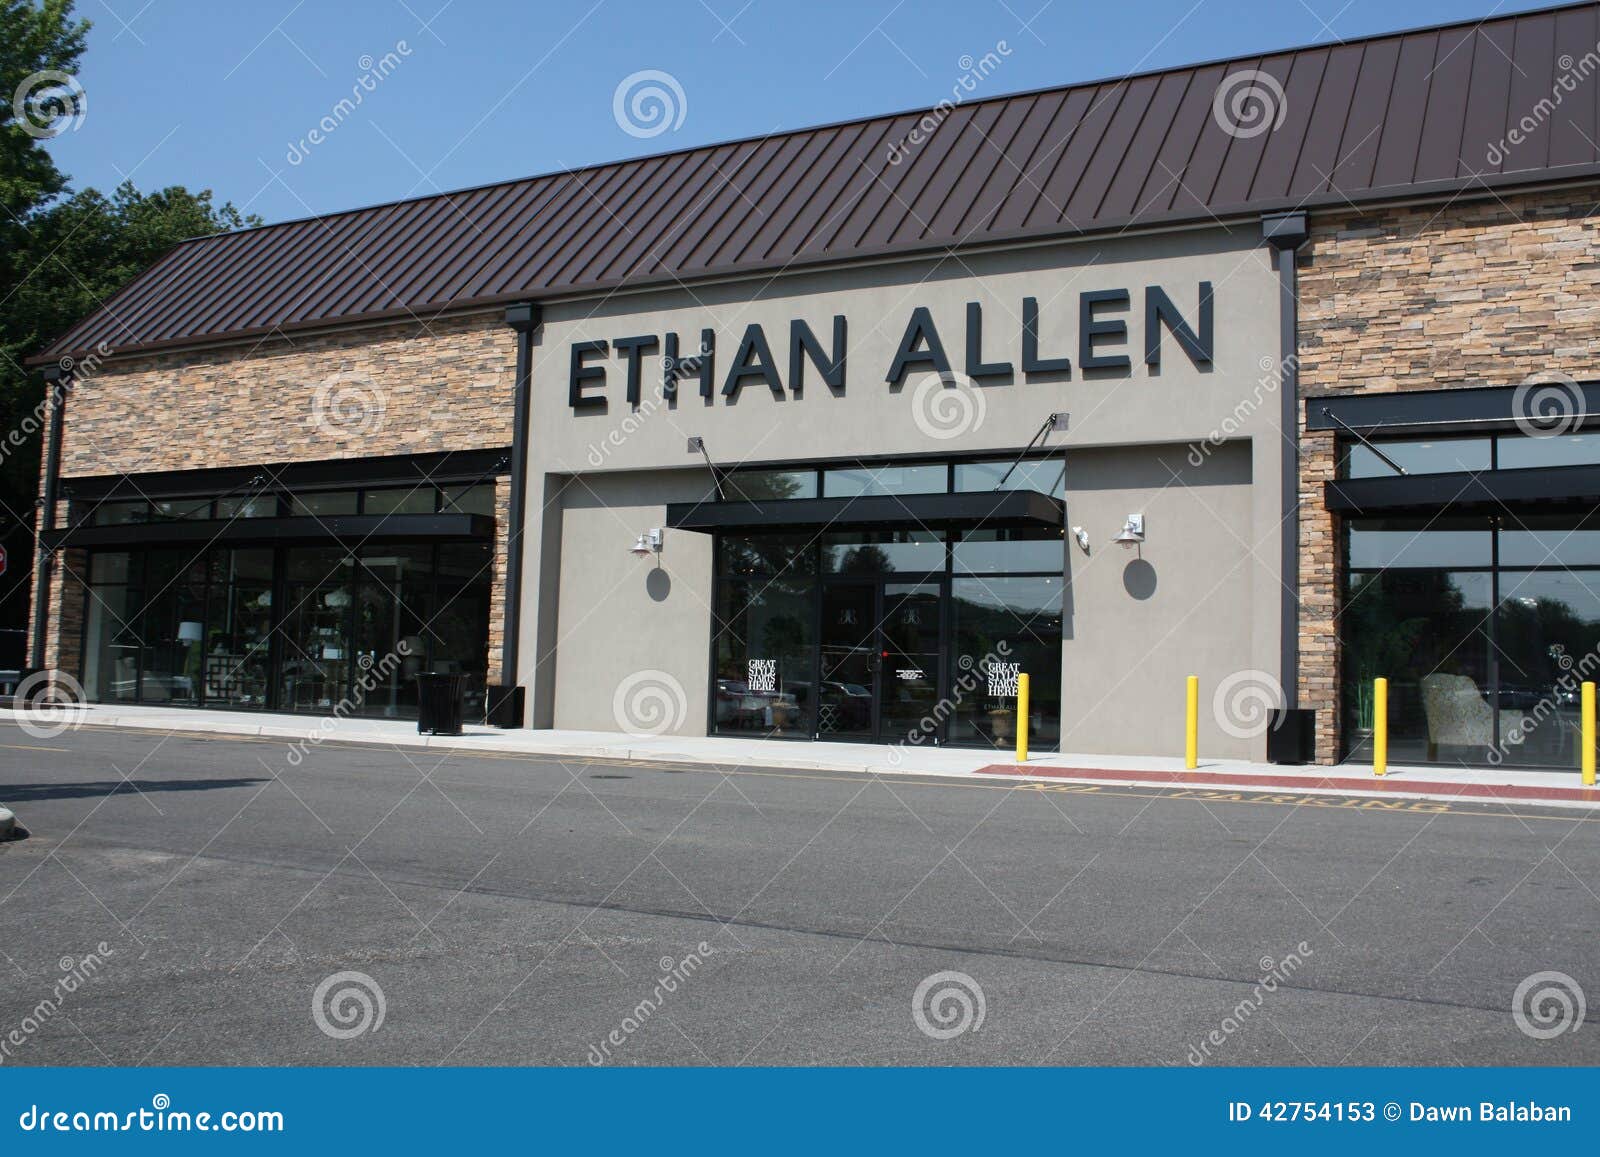 Ethan Allen Funiture Store Front 42754153 